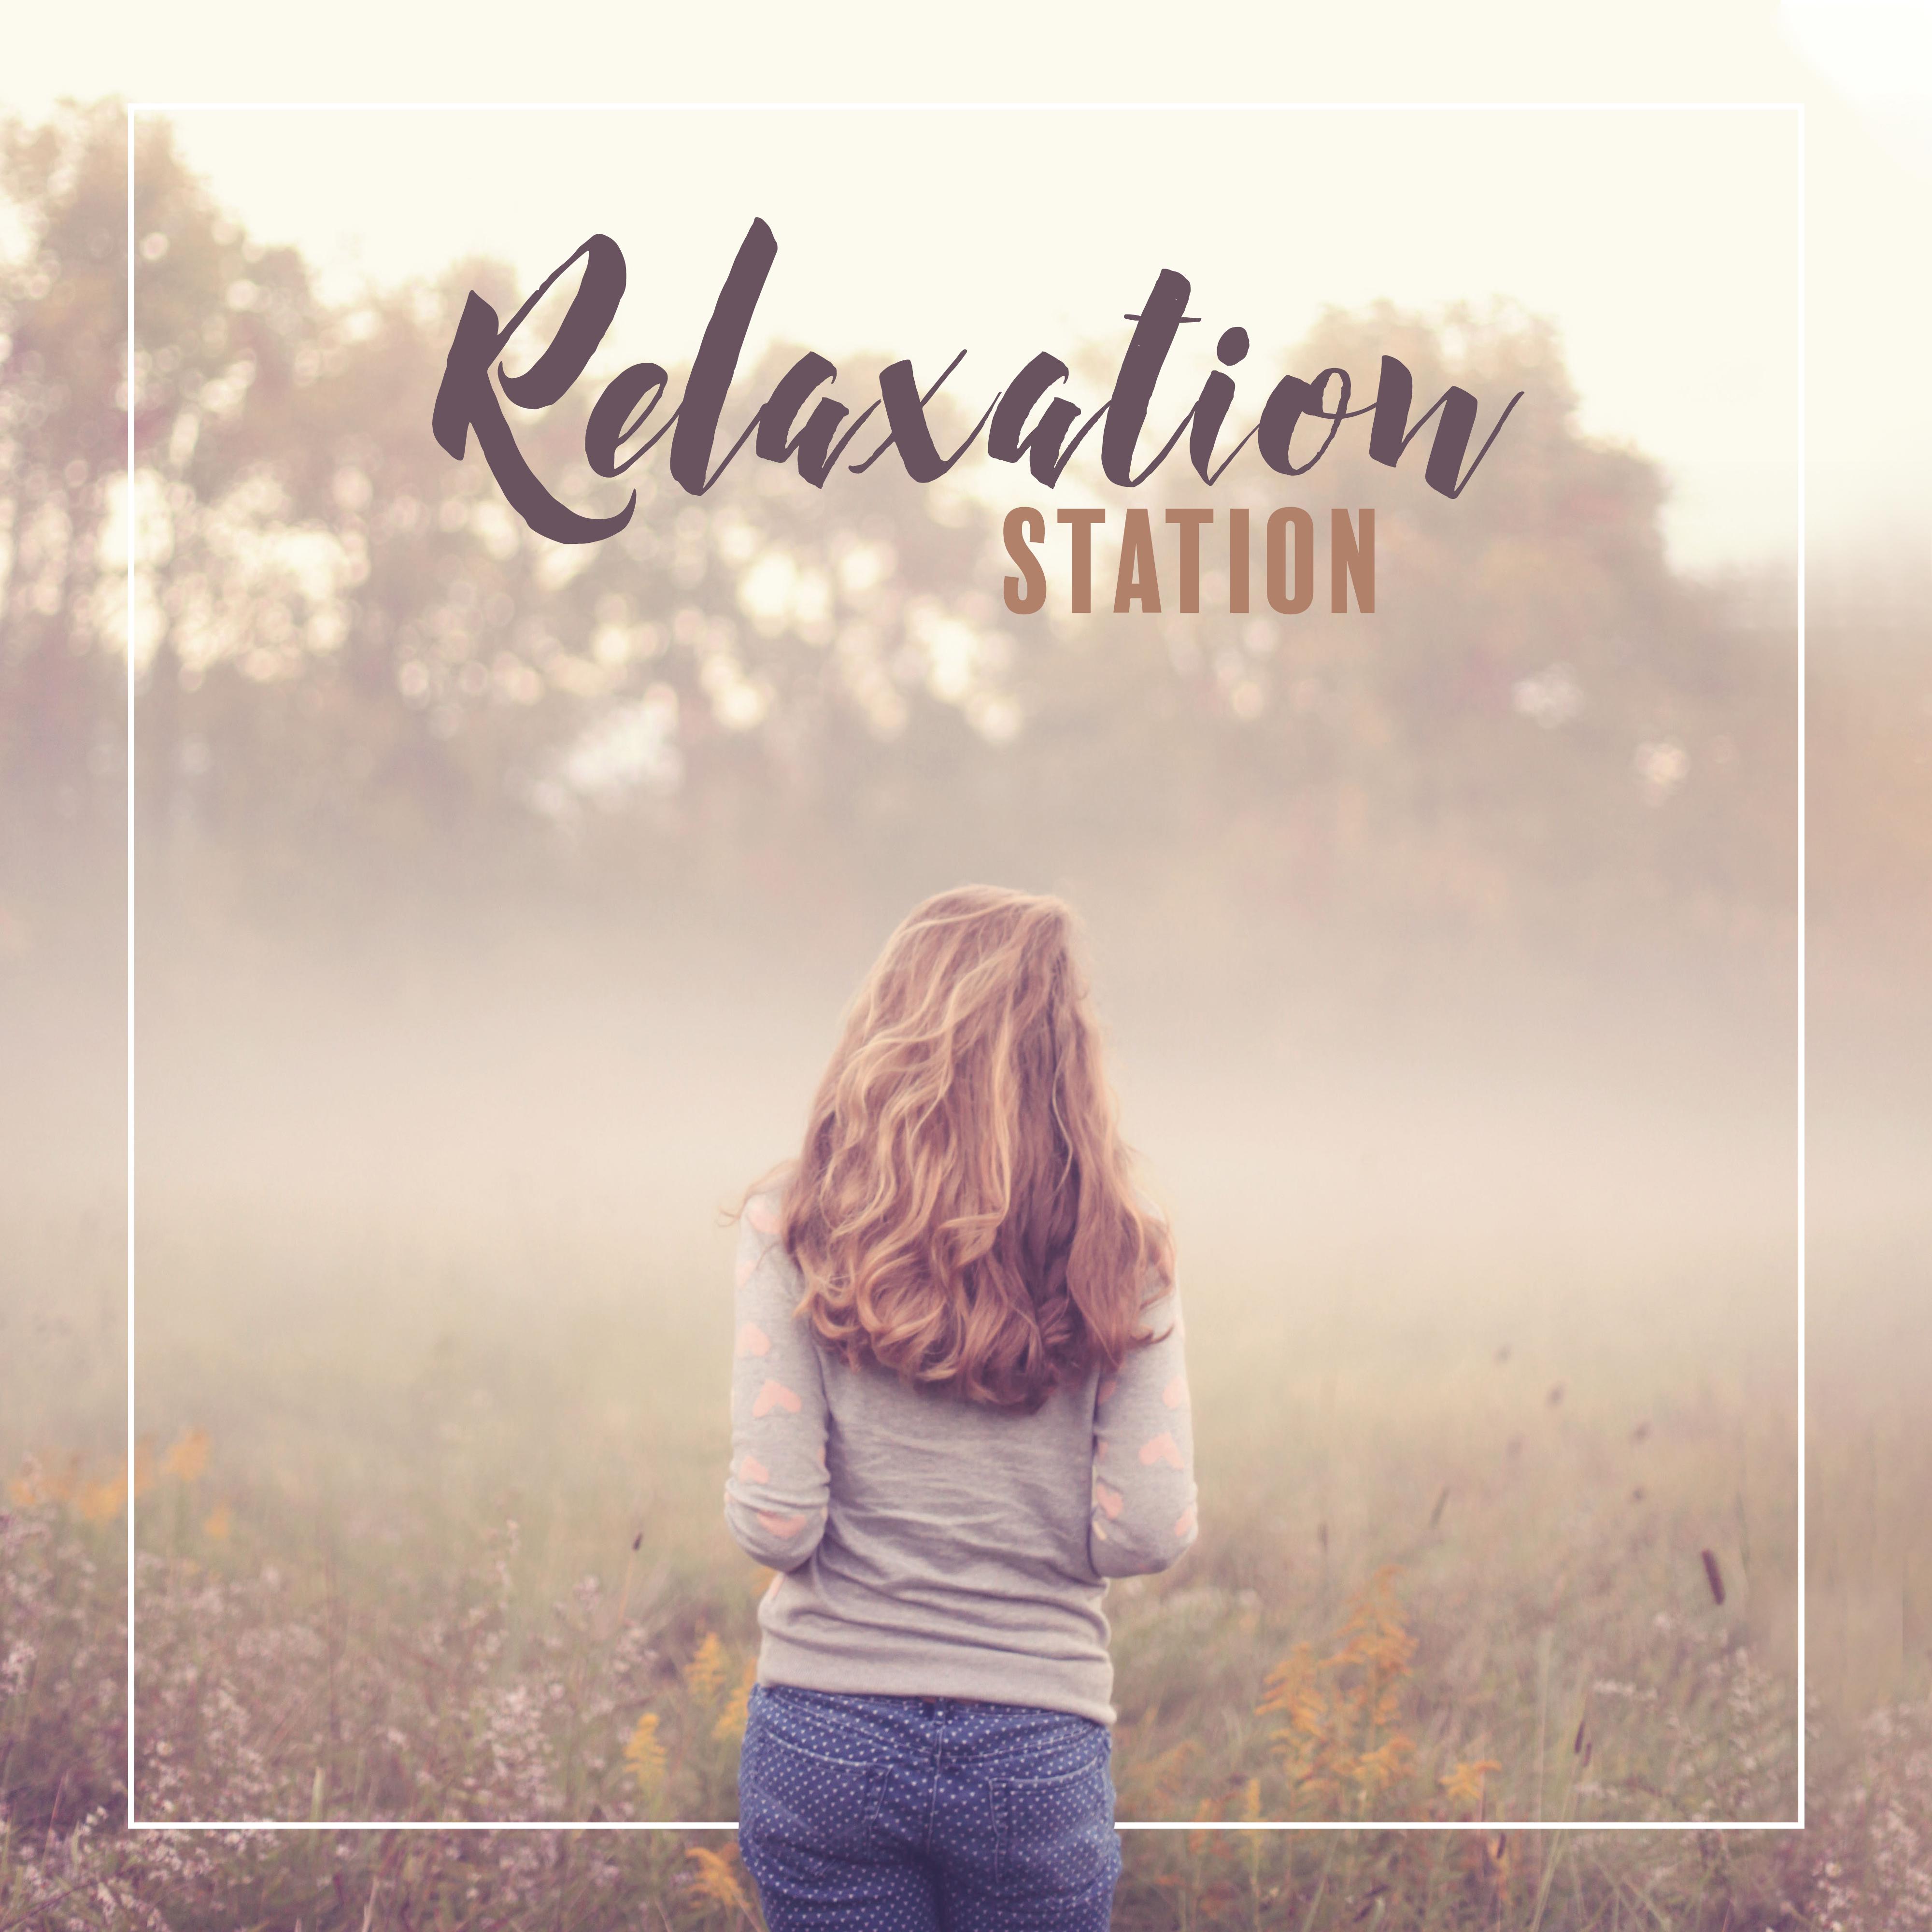 Relaxation Station – Relaxing Music Threrapy, Rest, Deep Meditation, Relaxation, Zen Serenity, Fresh Music to Calm Down